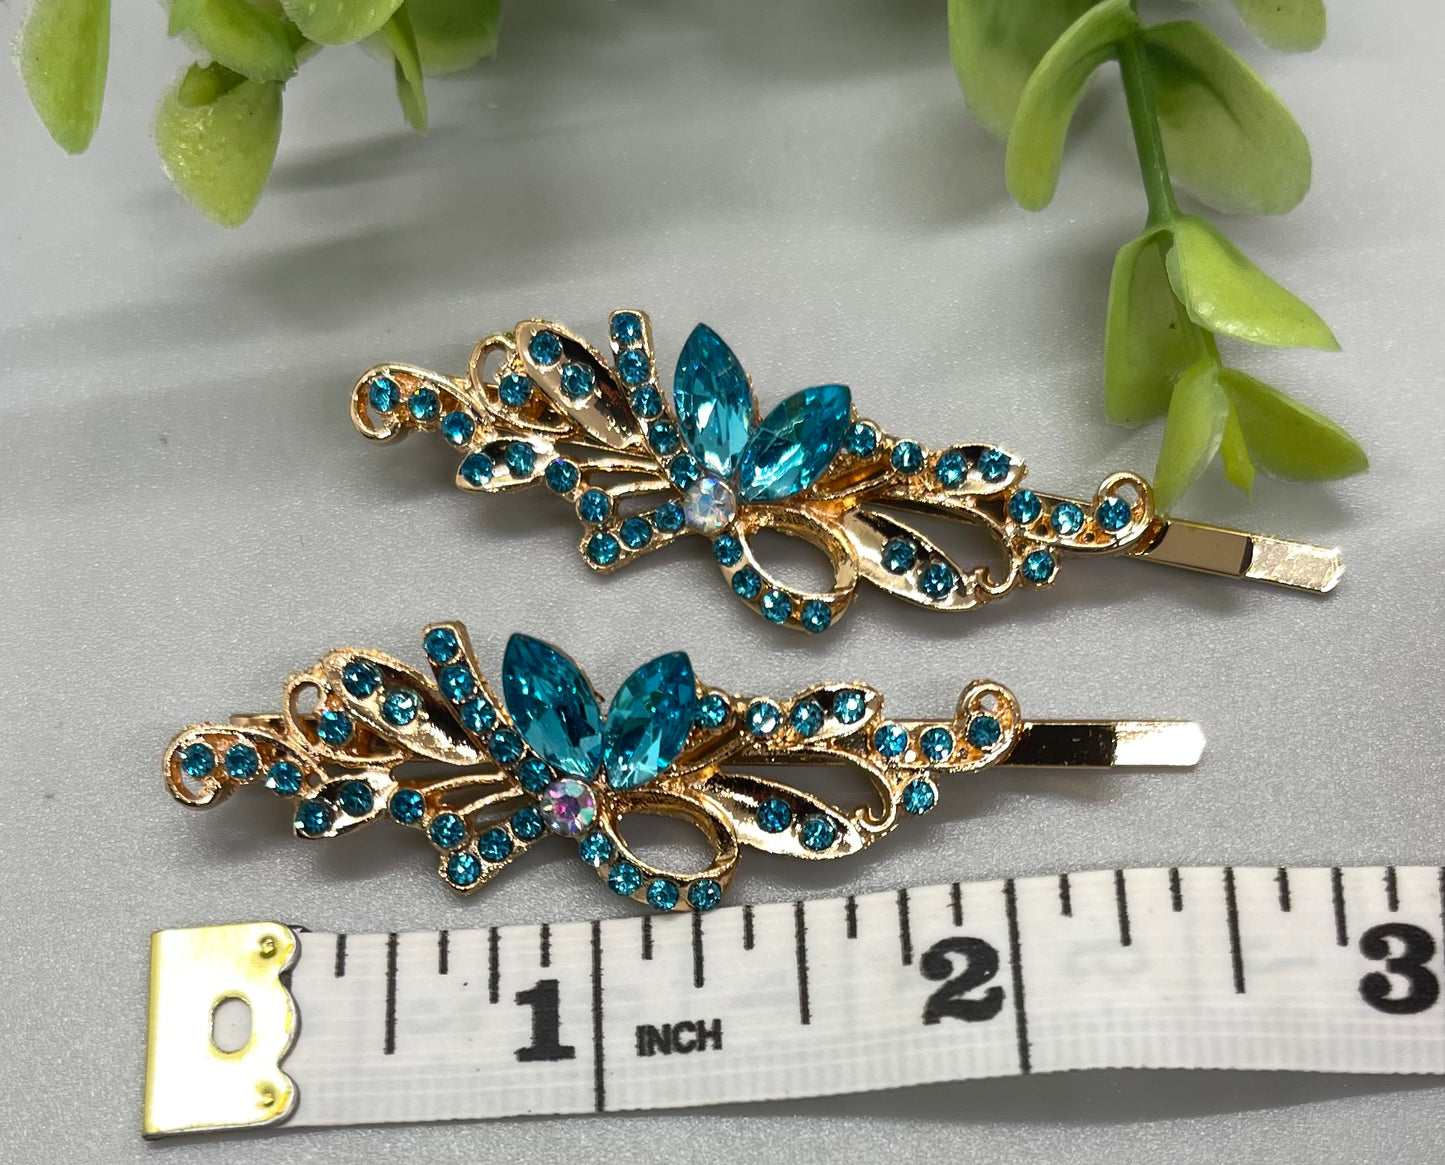 Teal crystal rhinestone Rose Gold approximately 2.75 hair pins 2 pc set wedding bridal shower engagement formal princess accessory birthday prom